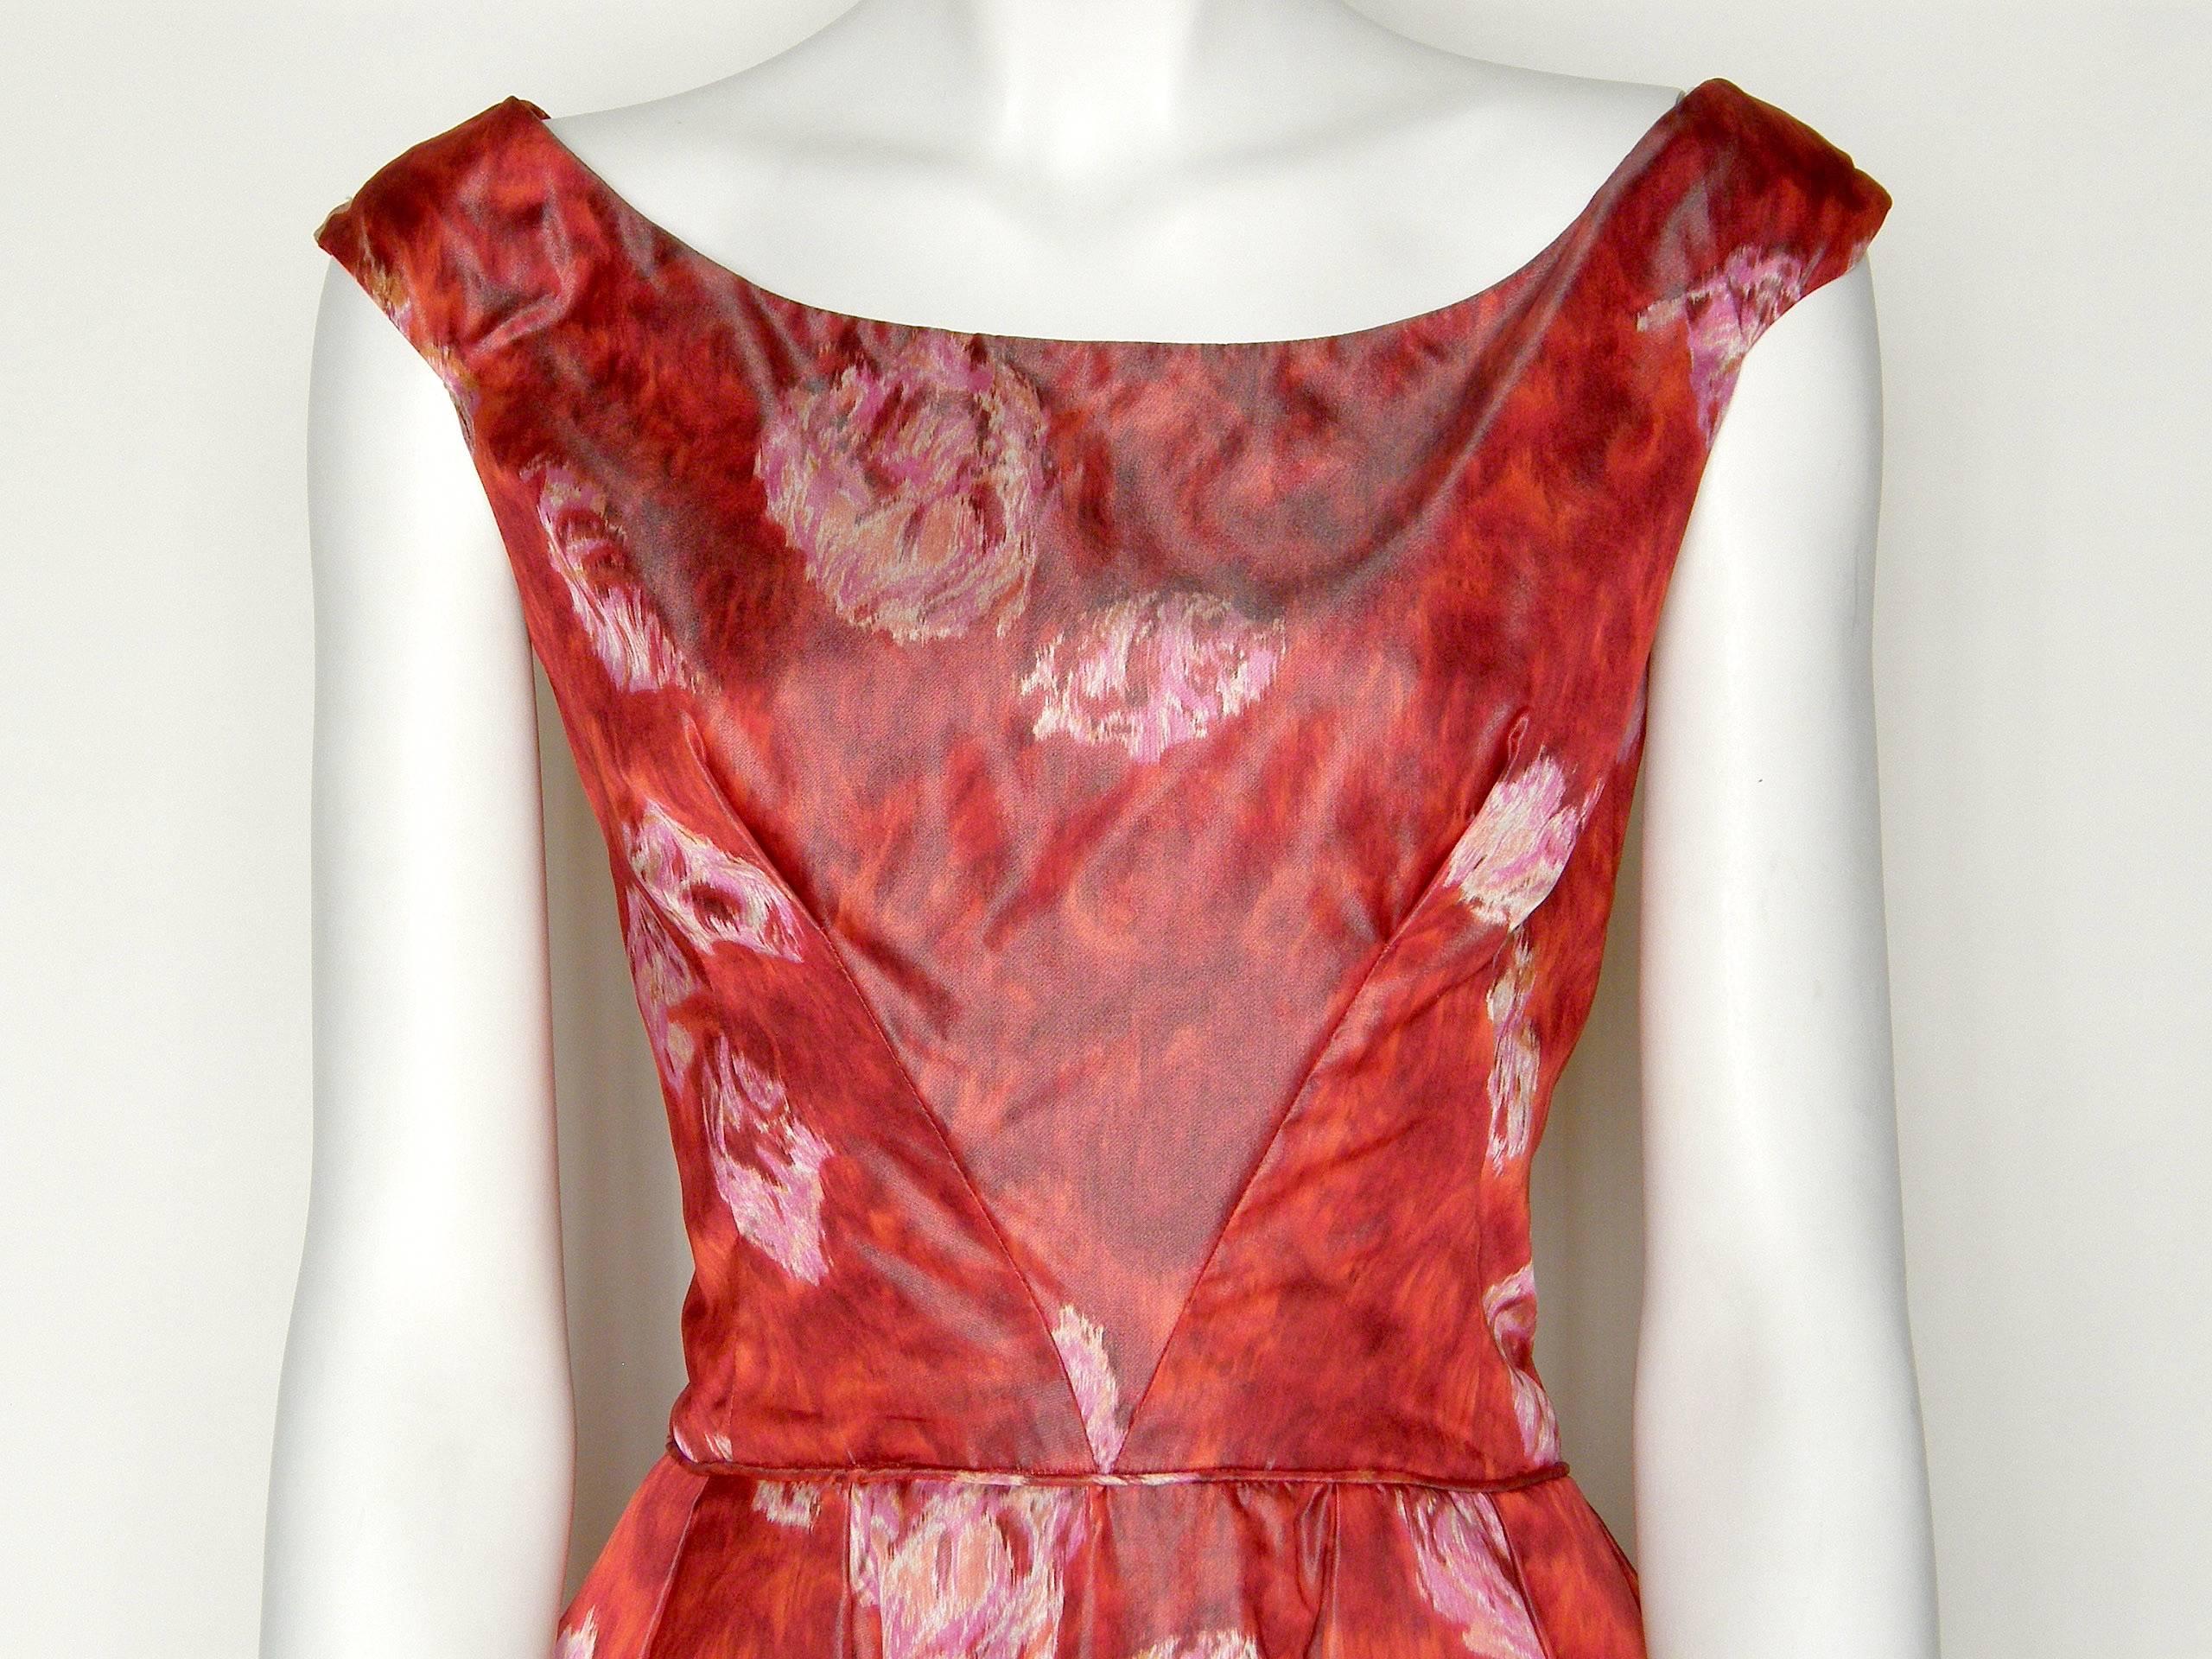 This chic cocktail dress has deep red silk fabric with a painterly, watercolor style roses print. The fabric 